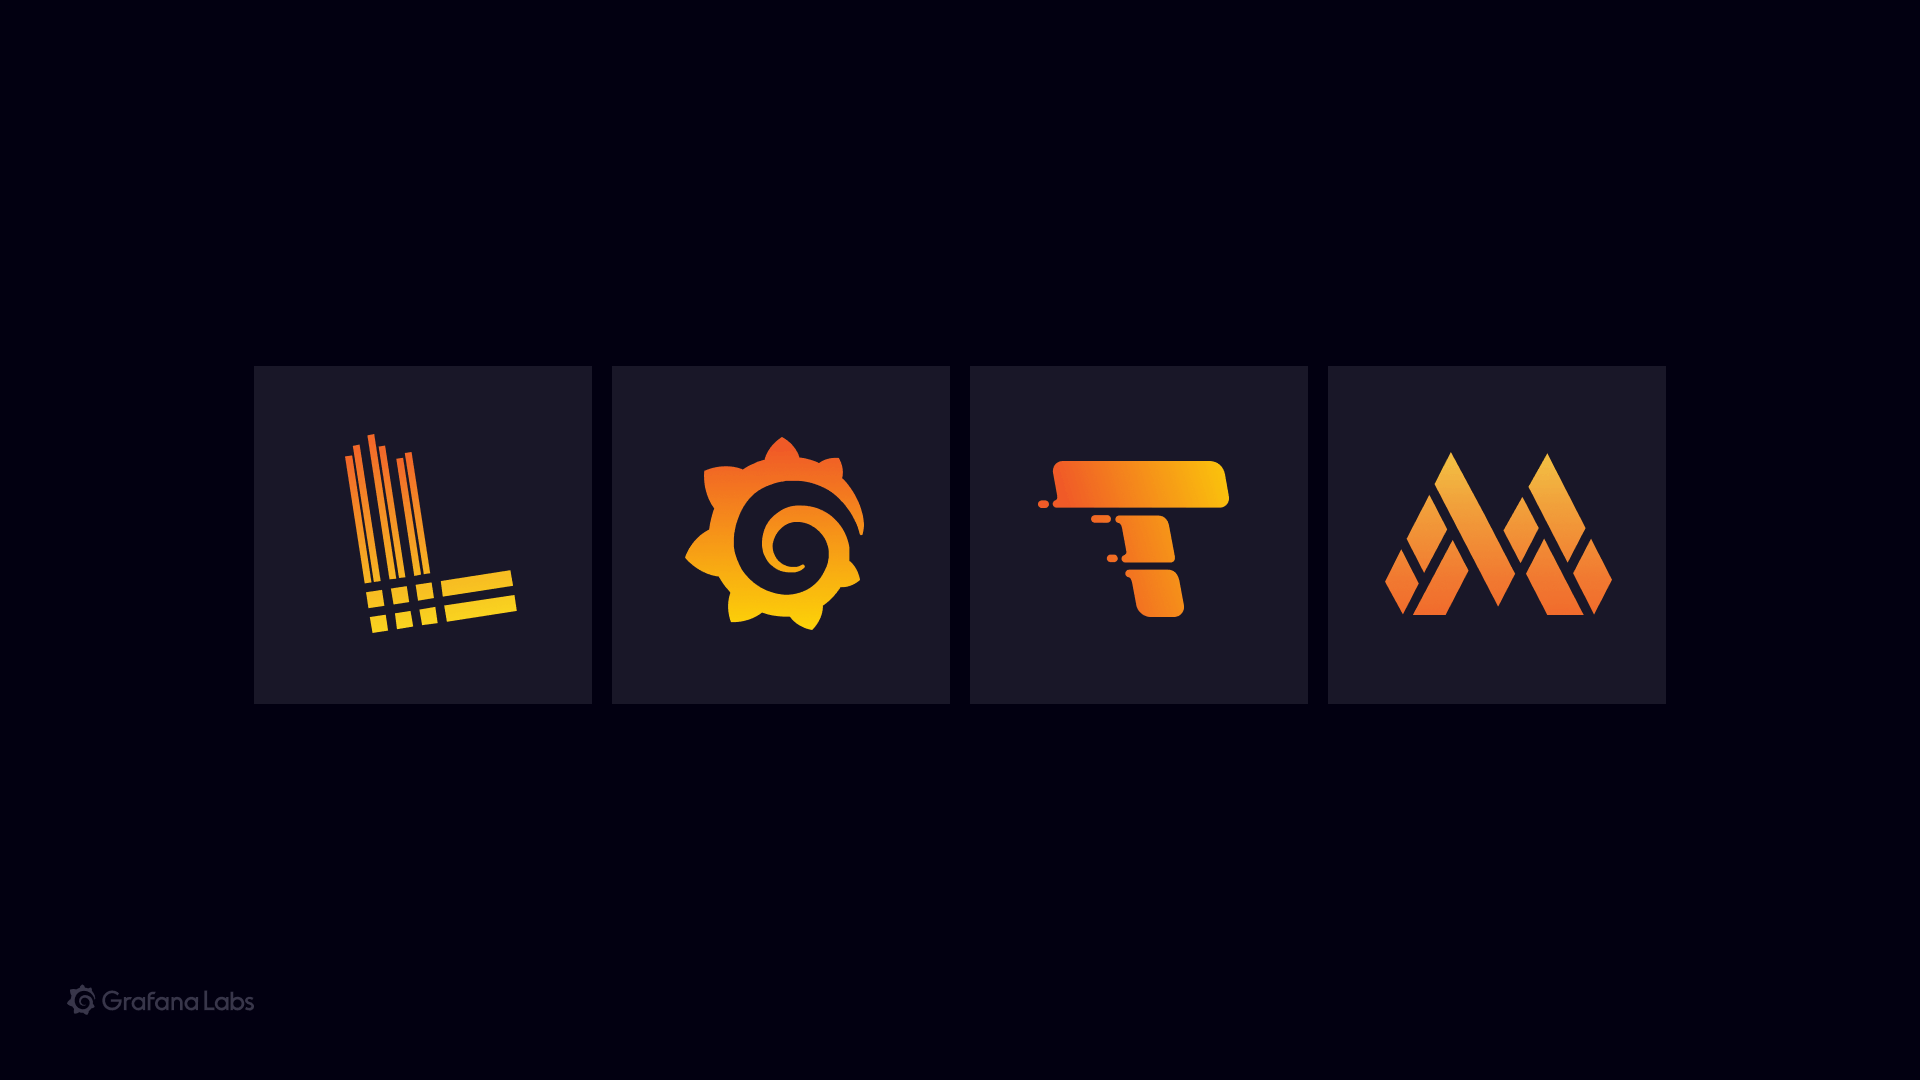 A wallpaper showing the logos for Loki, Grafana, Tempo, and Mimir, spelling "LGTM".